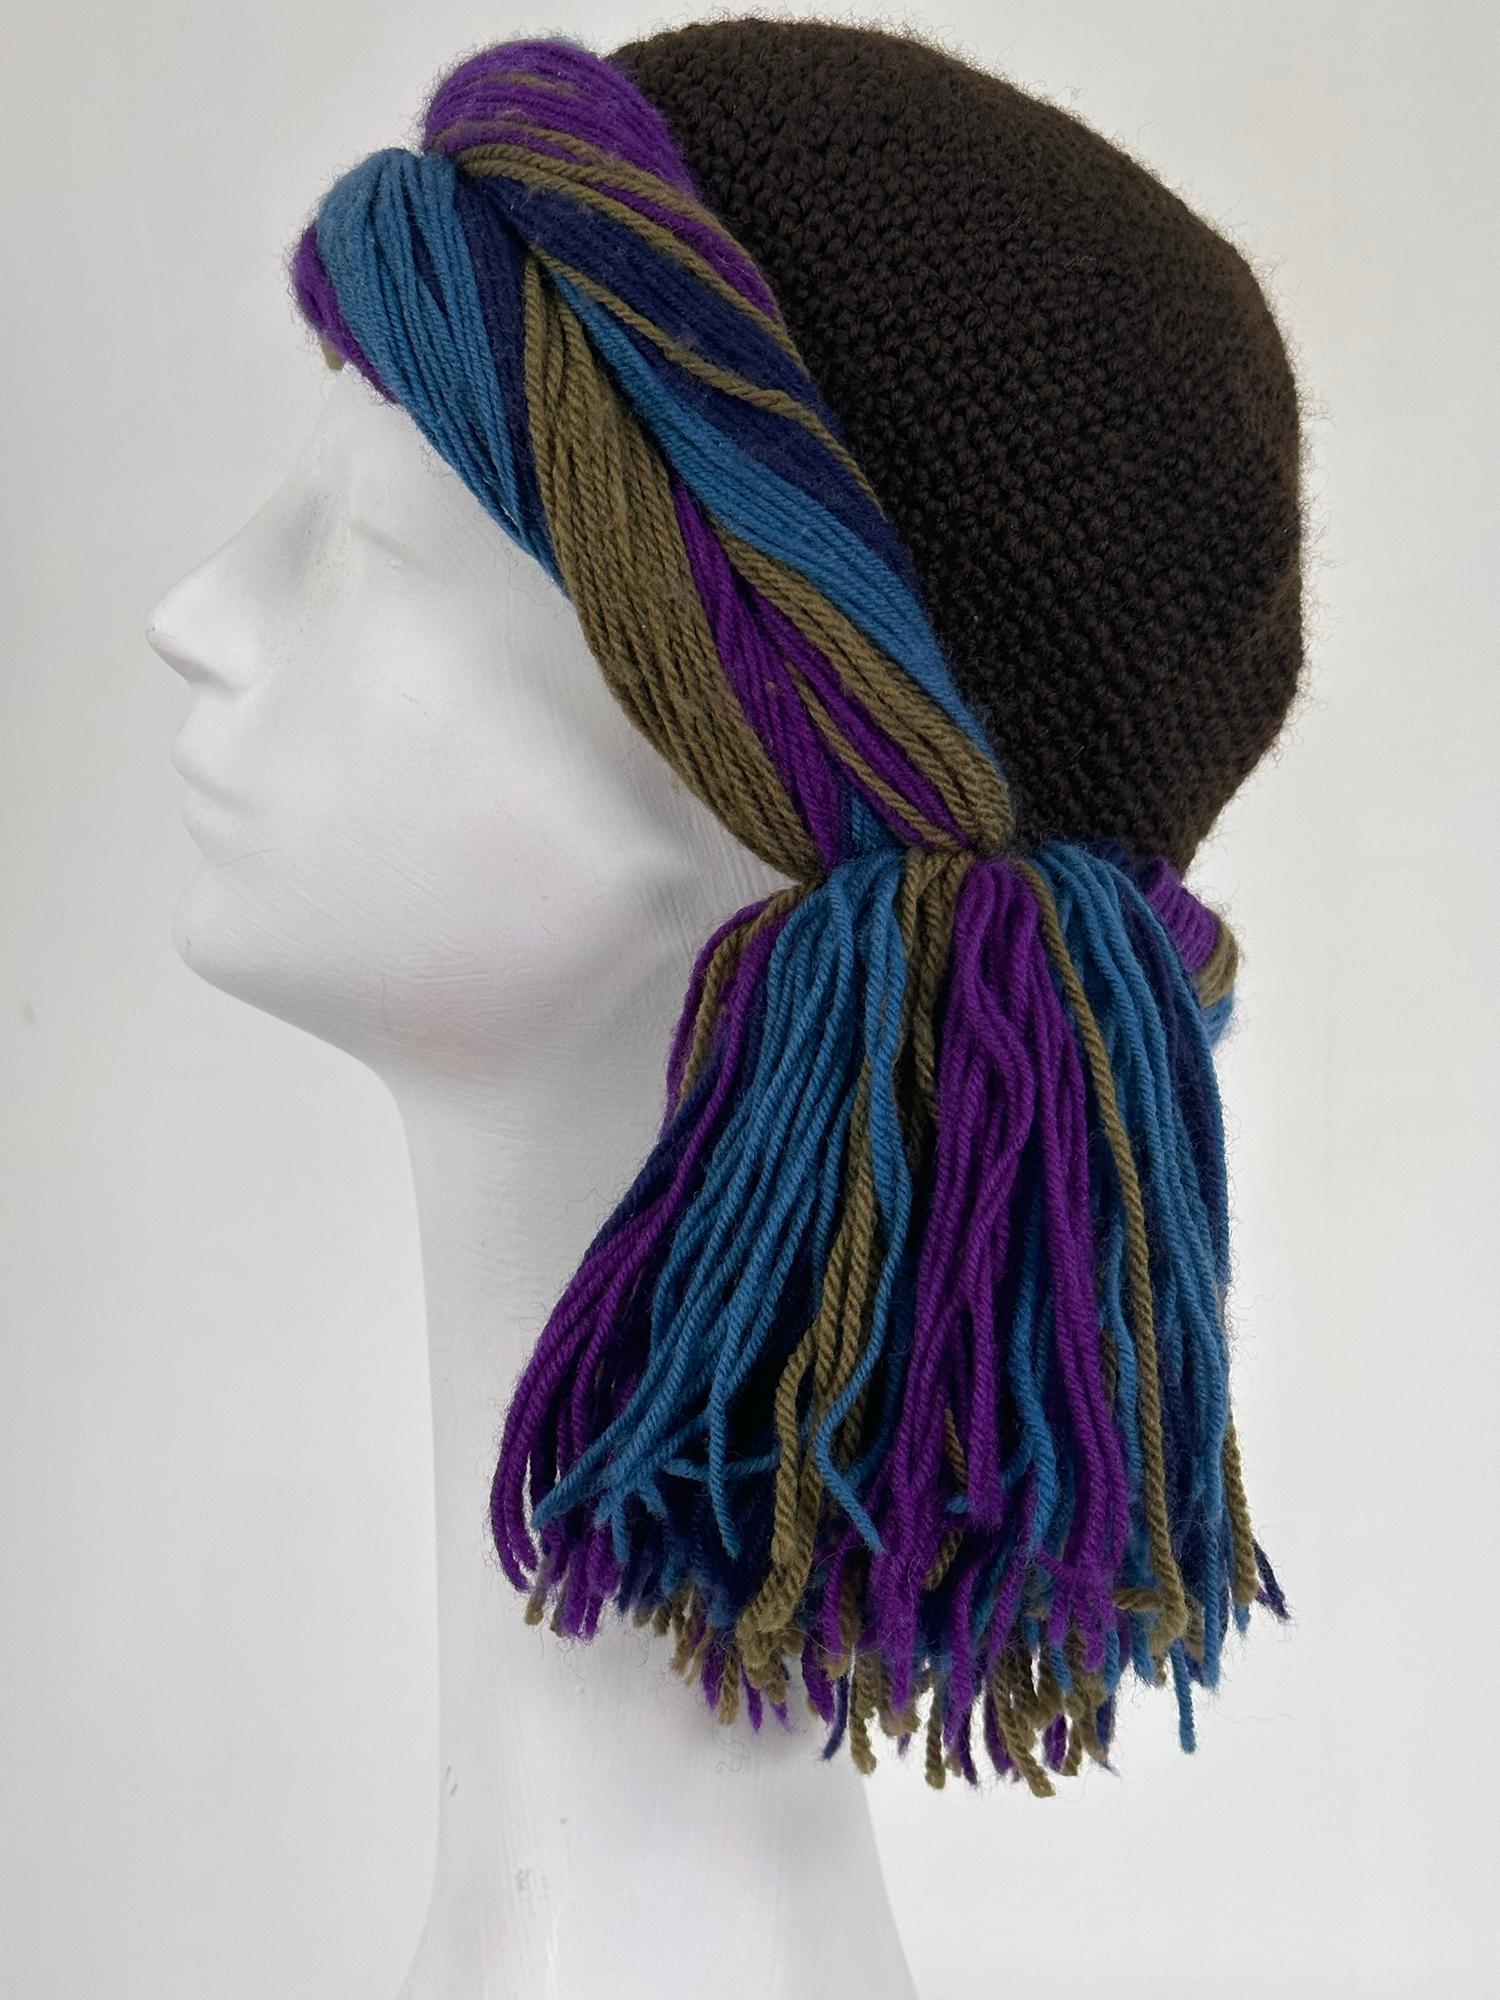 Rare 1970s Yves Saint Laurent Rive Gauche crochet cloche braid band & tassel in brown, the wool. Braid is purple, navy, blue & olive green. Fitted cloche cap has some stretch. Unlined. 
20